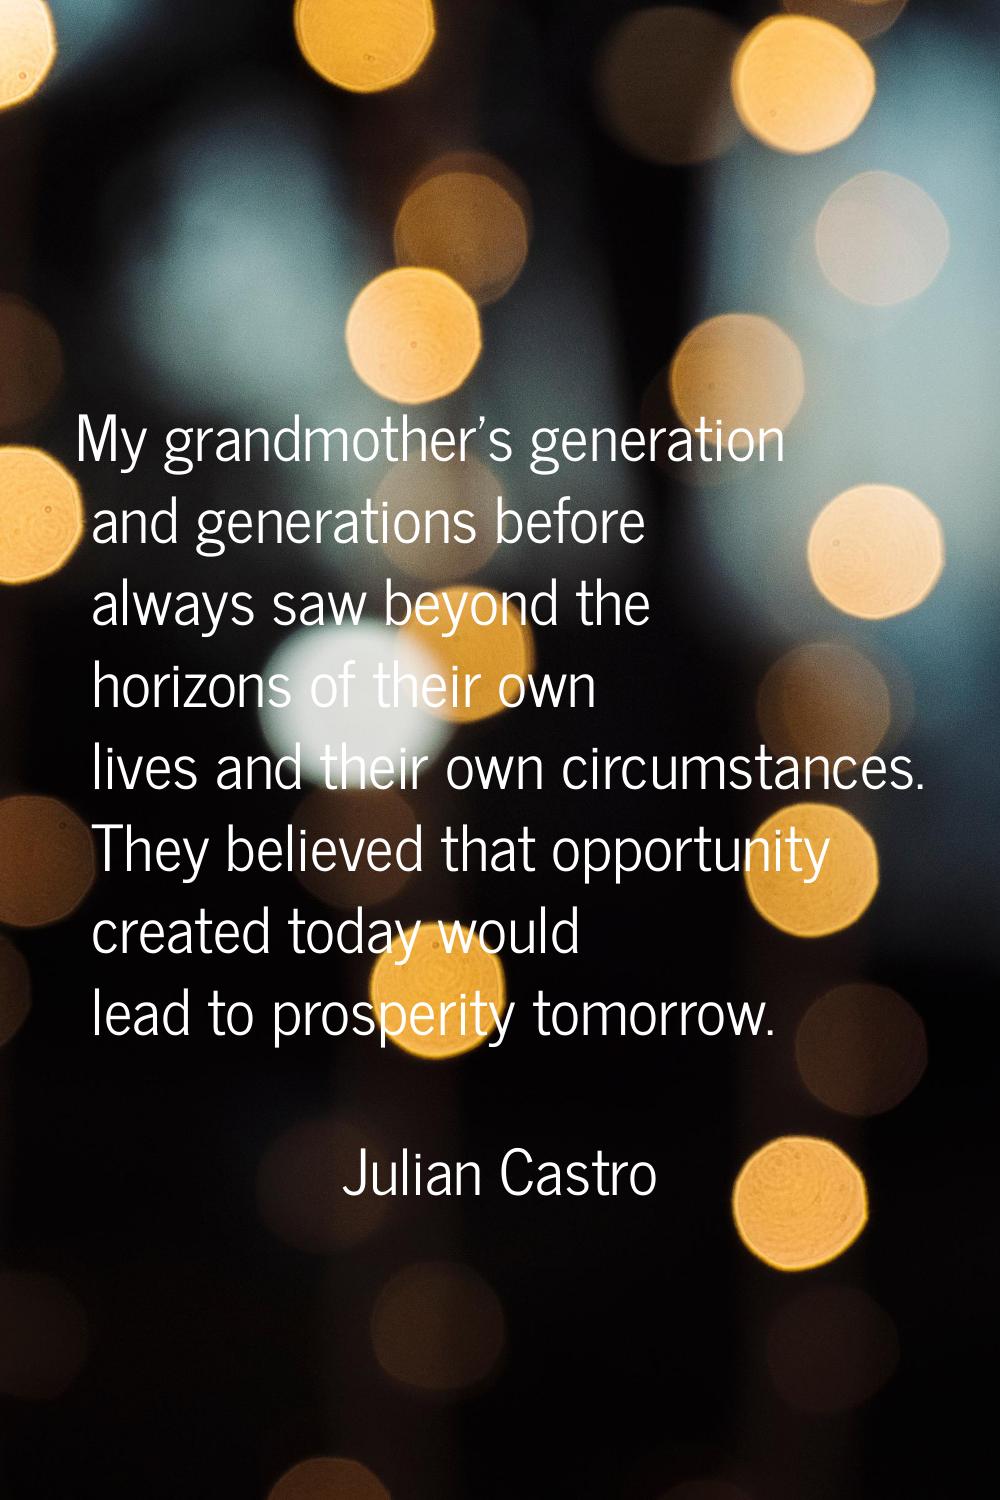 My grandmother's generation and generations before always saw beyond the horizons of their own live